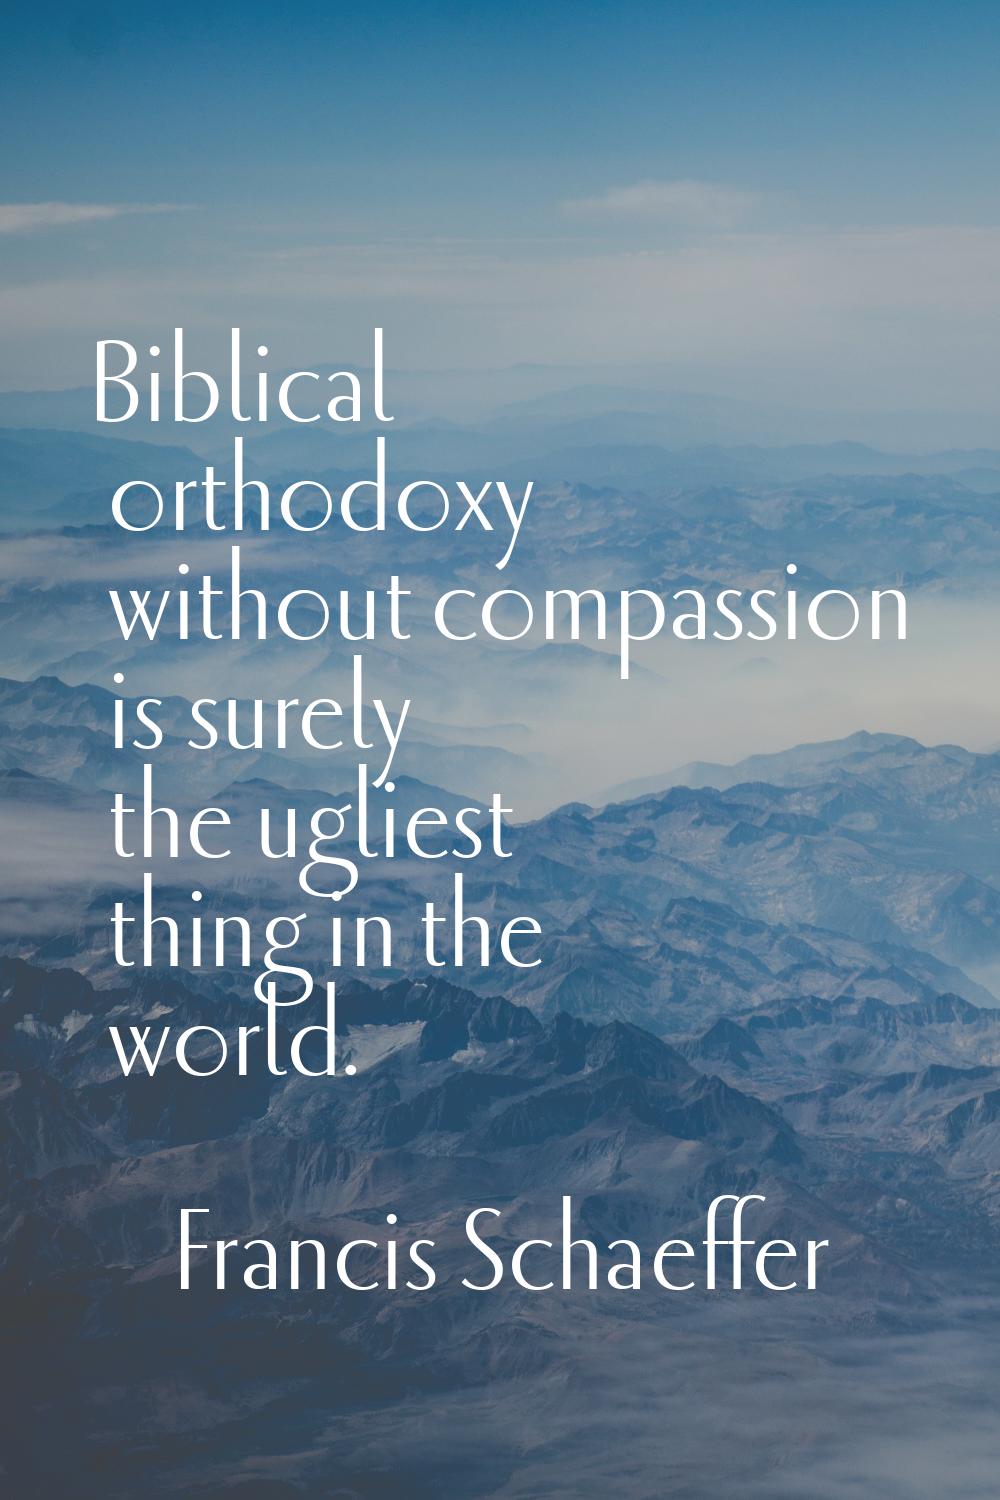 Biblical orthodoxy without compassion is surely the ugliest thing in the world.